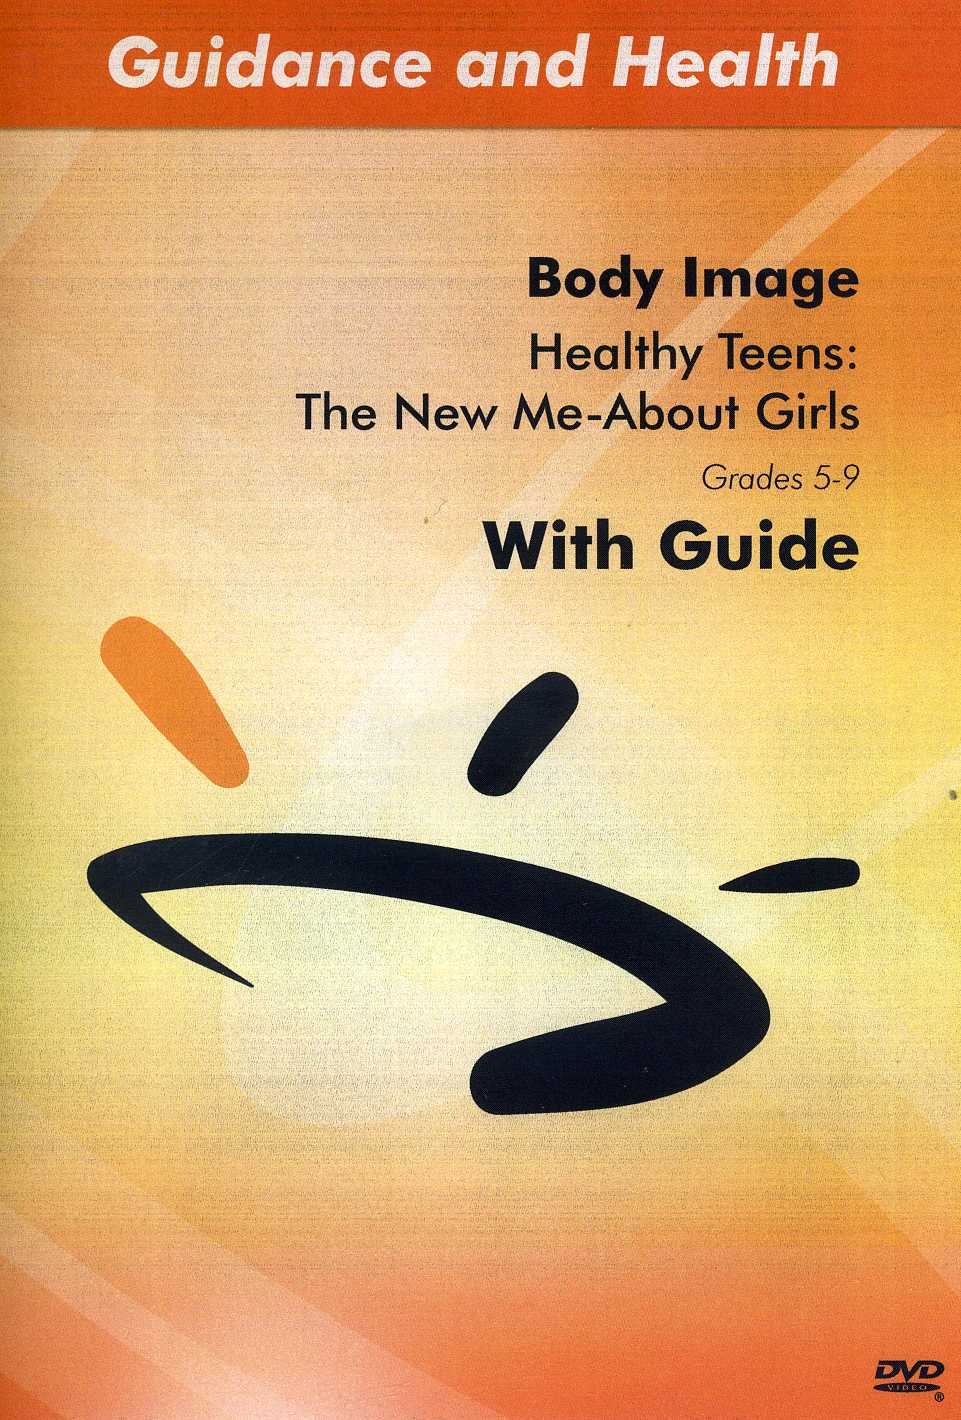 NEW ME-ABOUT GIRLS